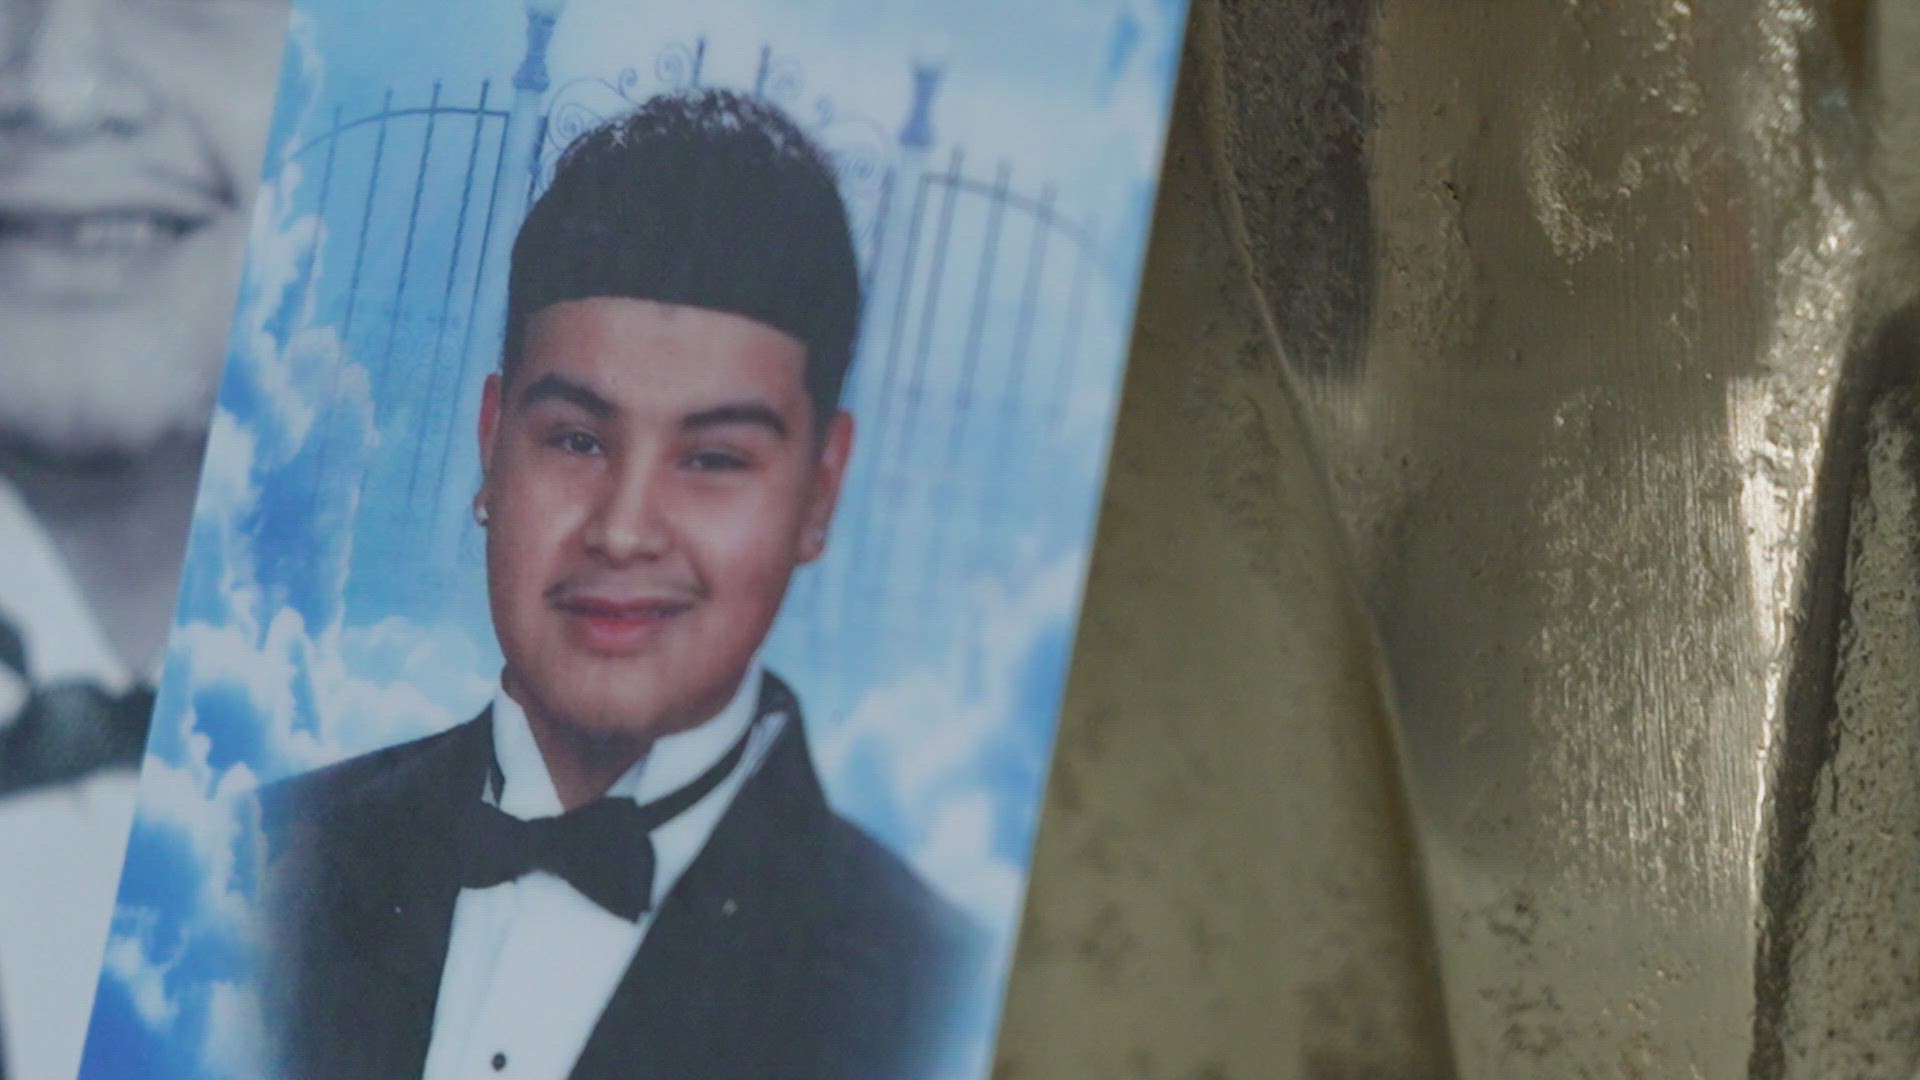 The 18-year-old suspect in the case was charged with criminally negligent homicide. The family says they need more info from police before calling that justice.